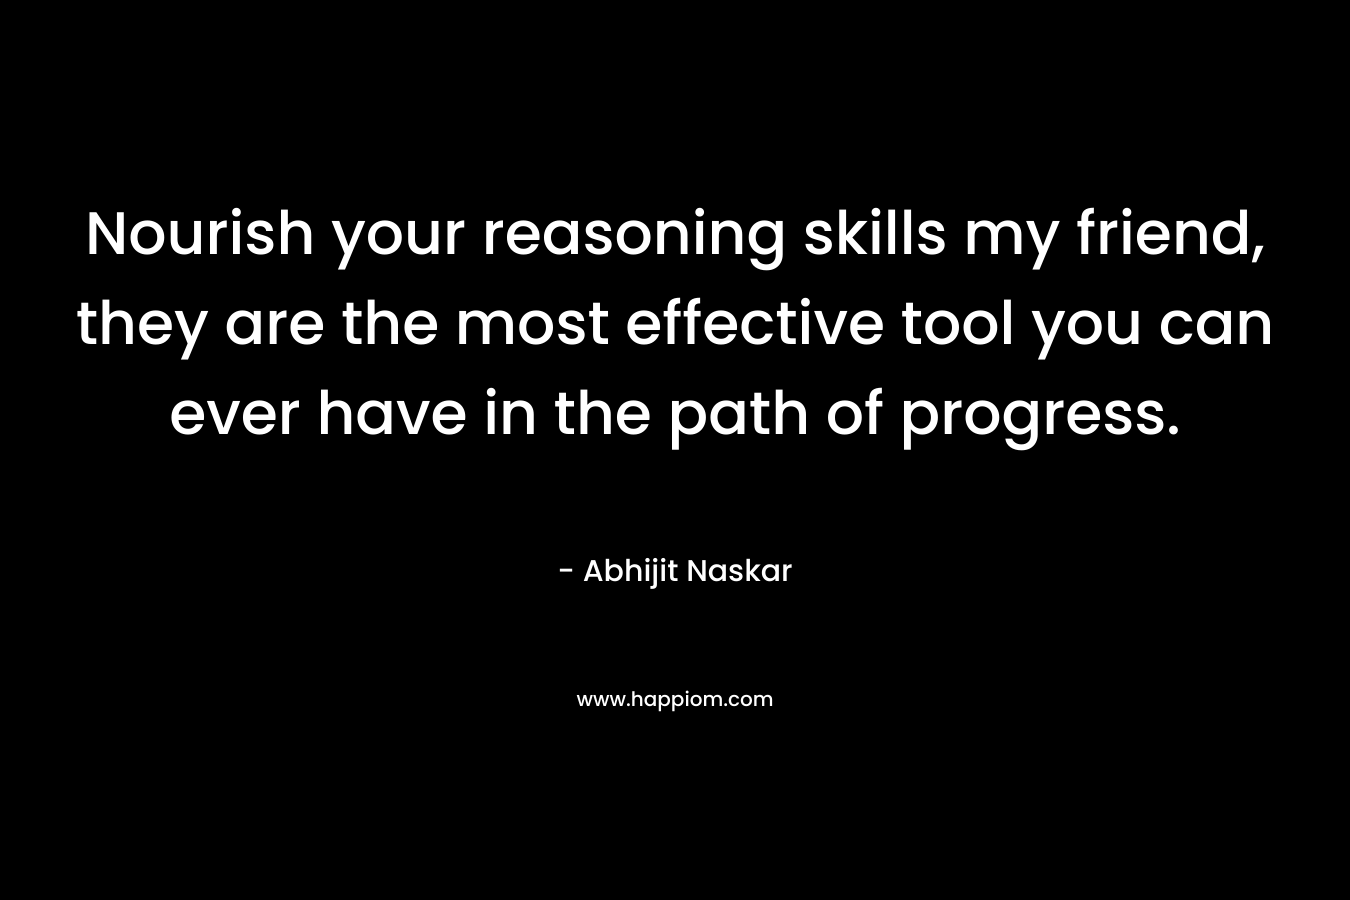 Nourish your reasoning skills my friend, they are the most effective tool you can ever have in the path of progress.